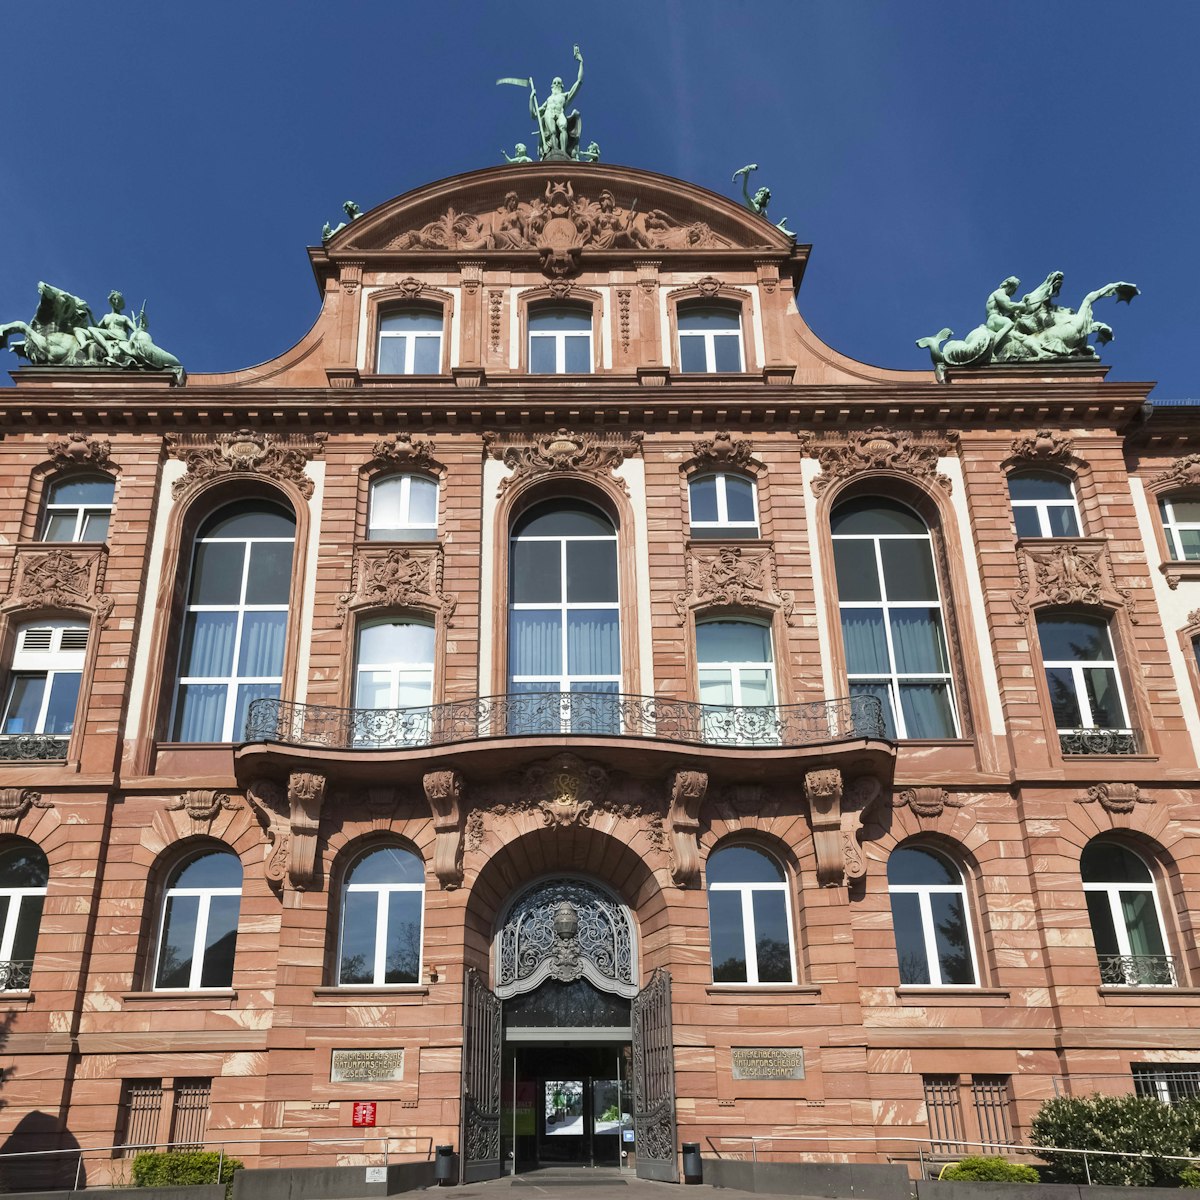 Germany, Frankfurt, Senckenberg Museum; Shutterstock ID 443693980; Your name (First / Last): Gemma Graham; GL account no.: 65050; Netsuite department name: Online Editorial; Full Product or Project name including edition: 100 Cities Guides app image downloads